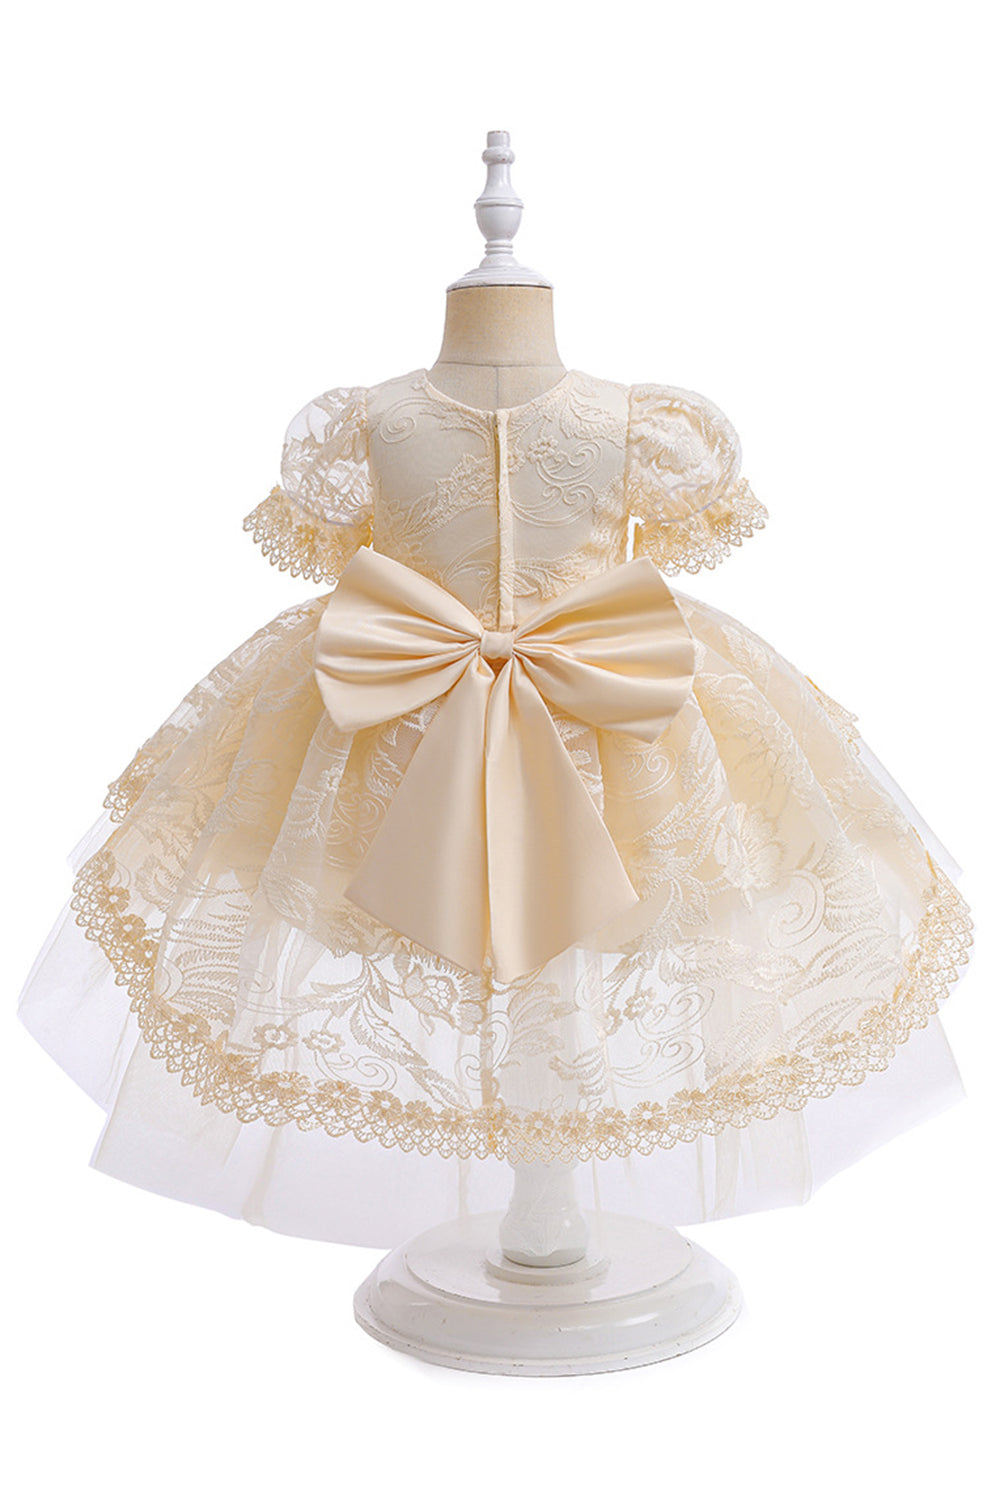 White Tulle A Line Gir Party Dress with Bow